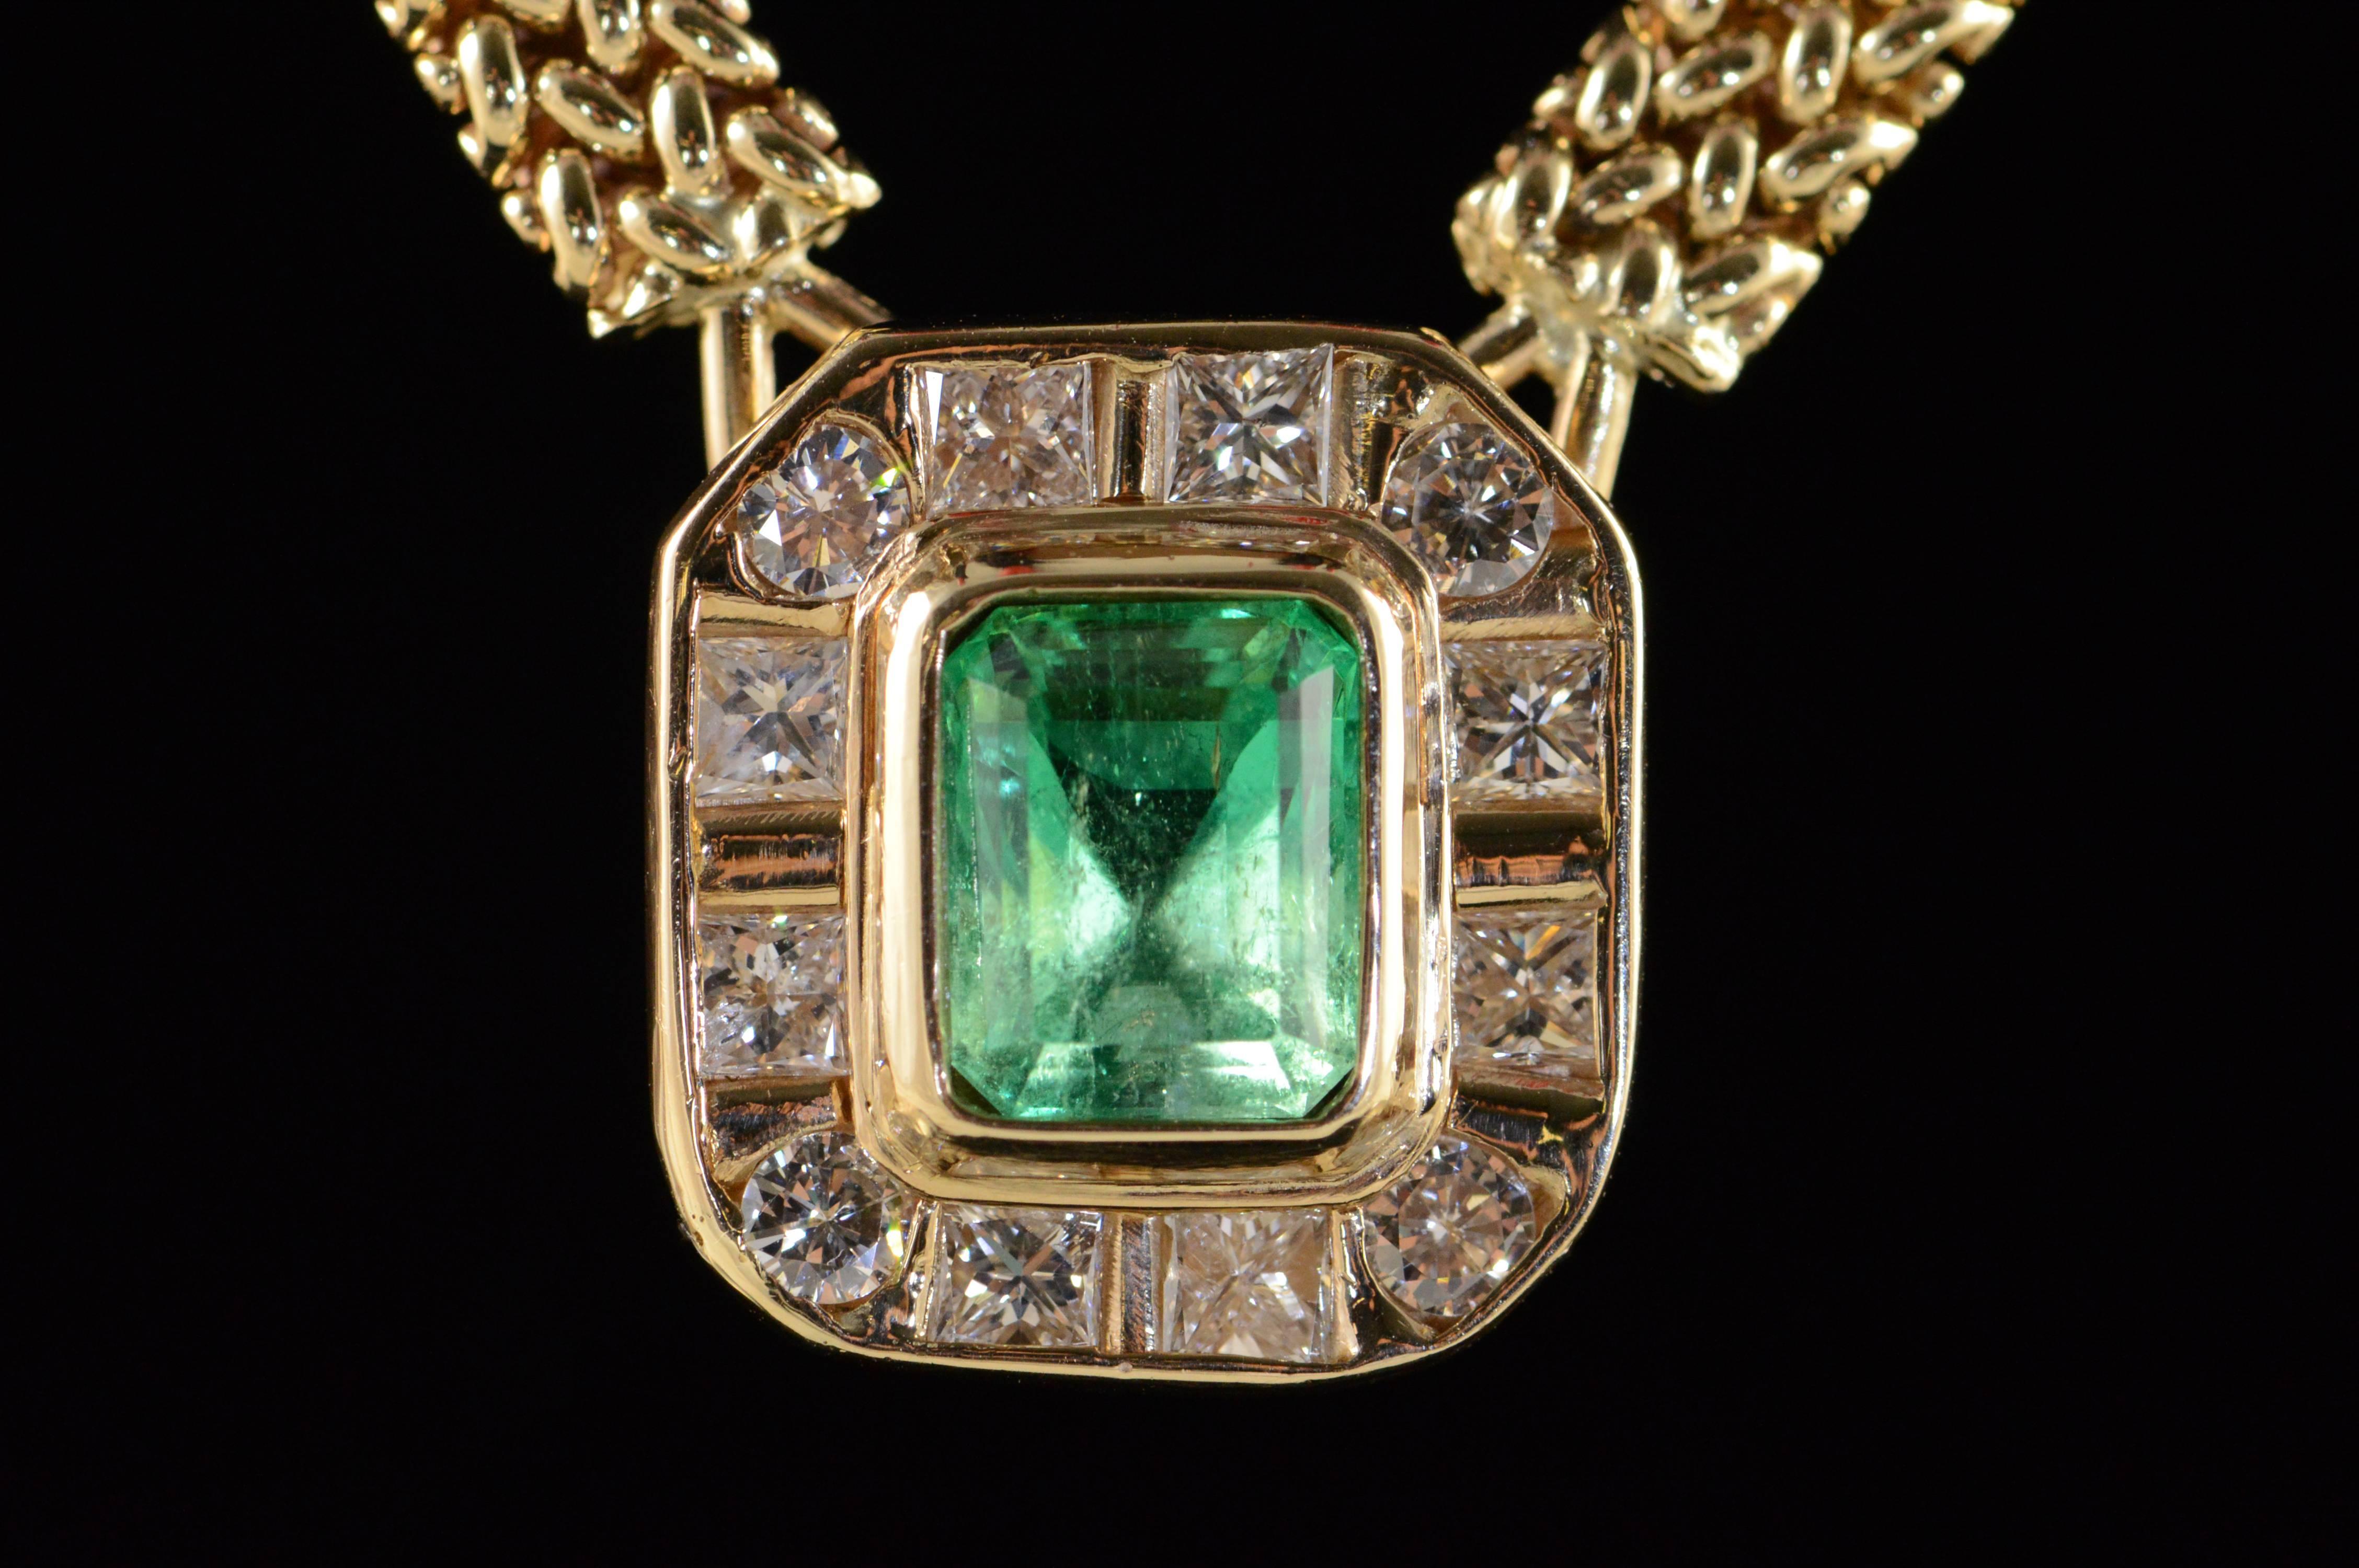 This emerald and diamond halo statement piece is sure to turn heads with its bold design and classic styling.

All diamonds are graded according to GIA grading standards

·Item: 14K 2.91 CT Emerald 0.88 CTW Diamond Halo Pendant Link Necklace